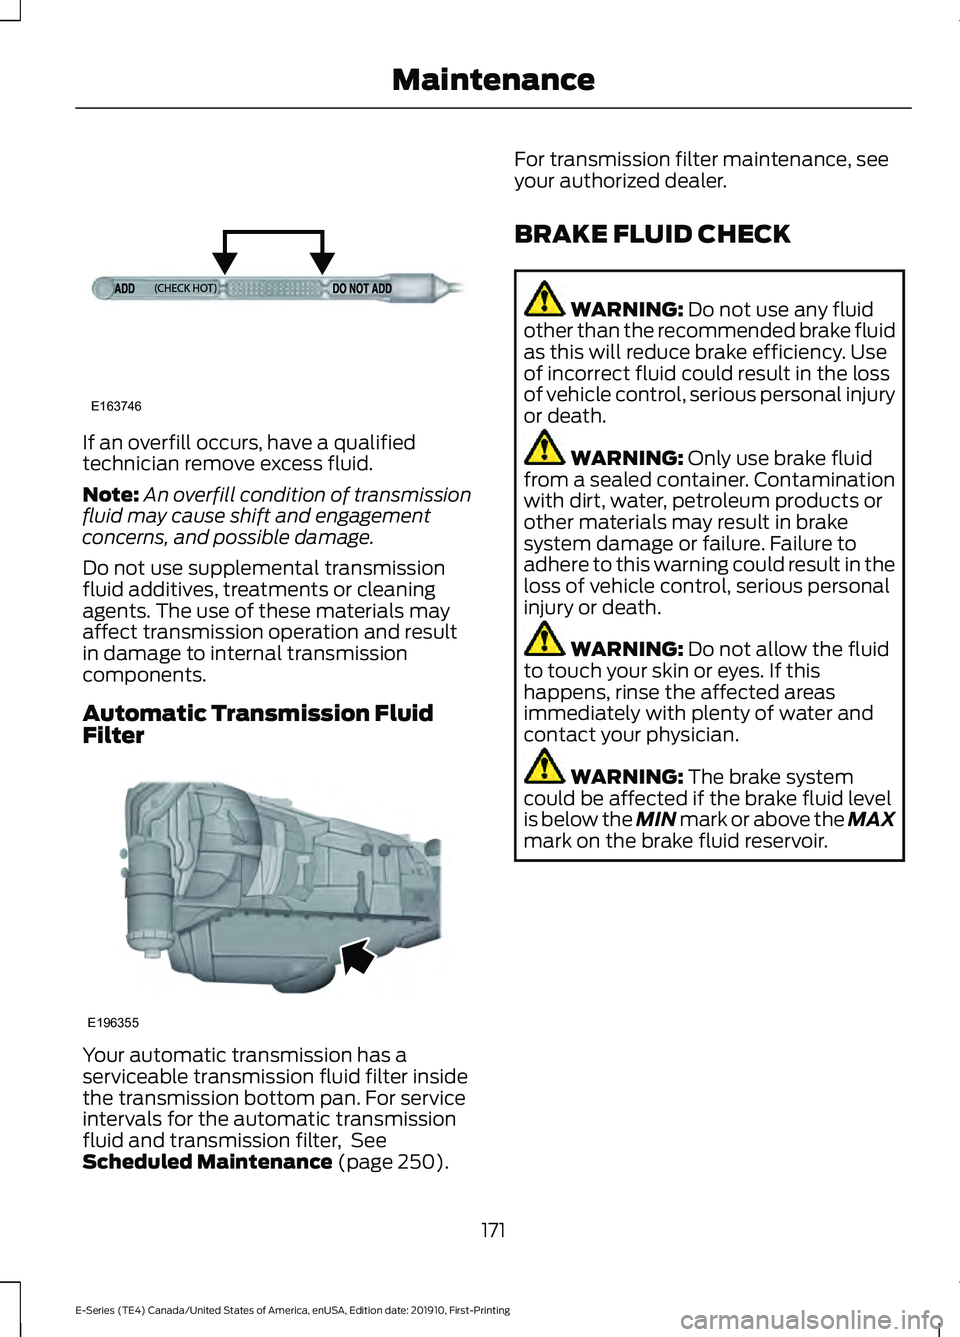 FORD E-350 2021 Owners Guide If an overfill occurs, have a qualified
technician remove excess fluid.
Note:
An overfill condition of transmission
fluid may cause shift and engagement
concerns, and possible damage.
Do not use suppl